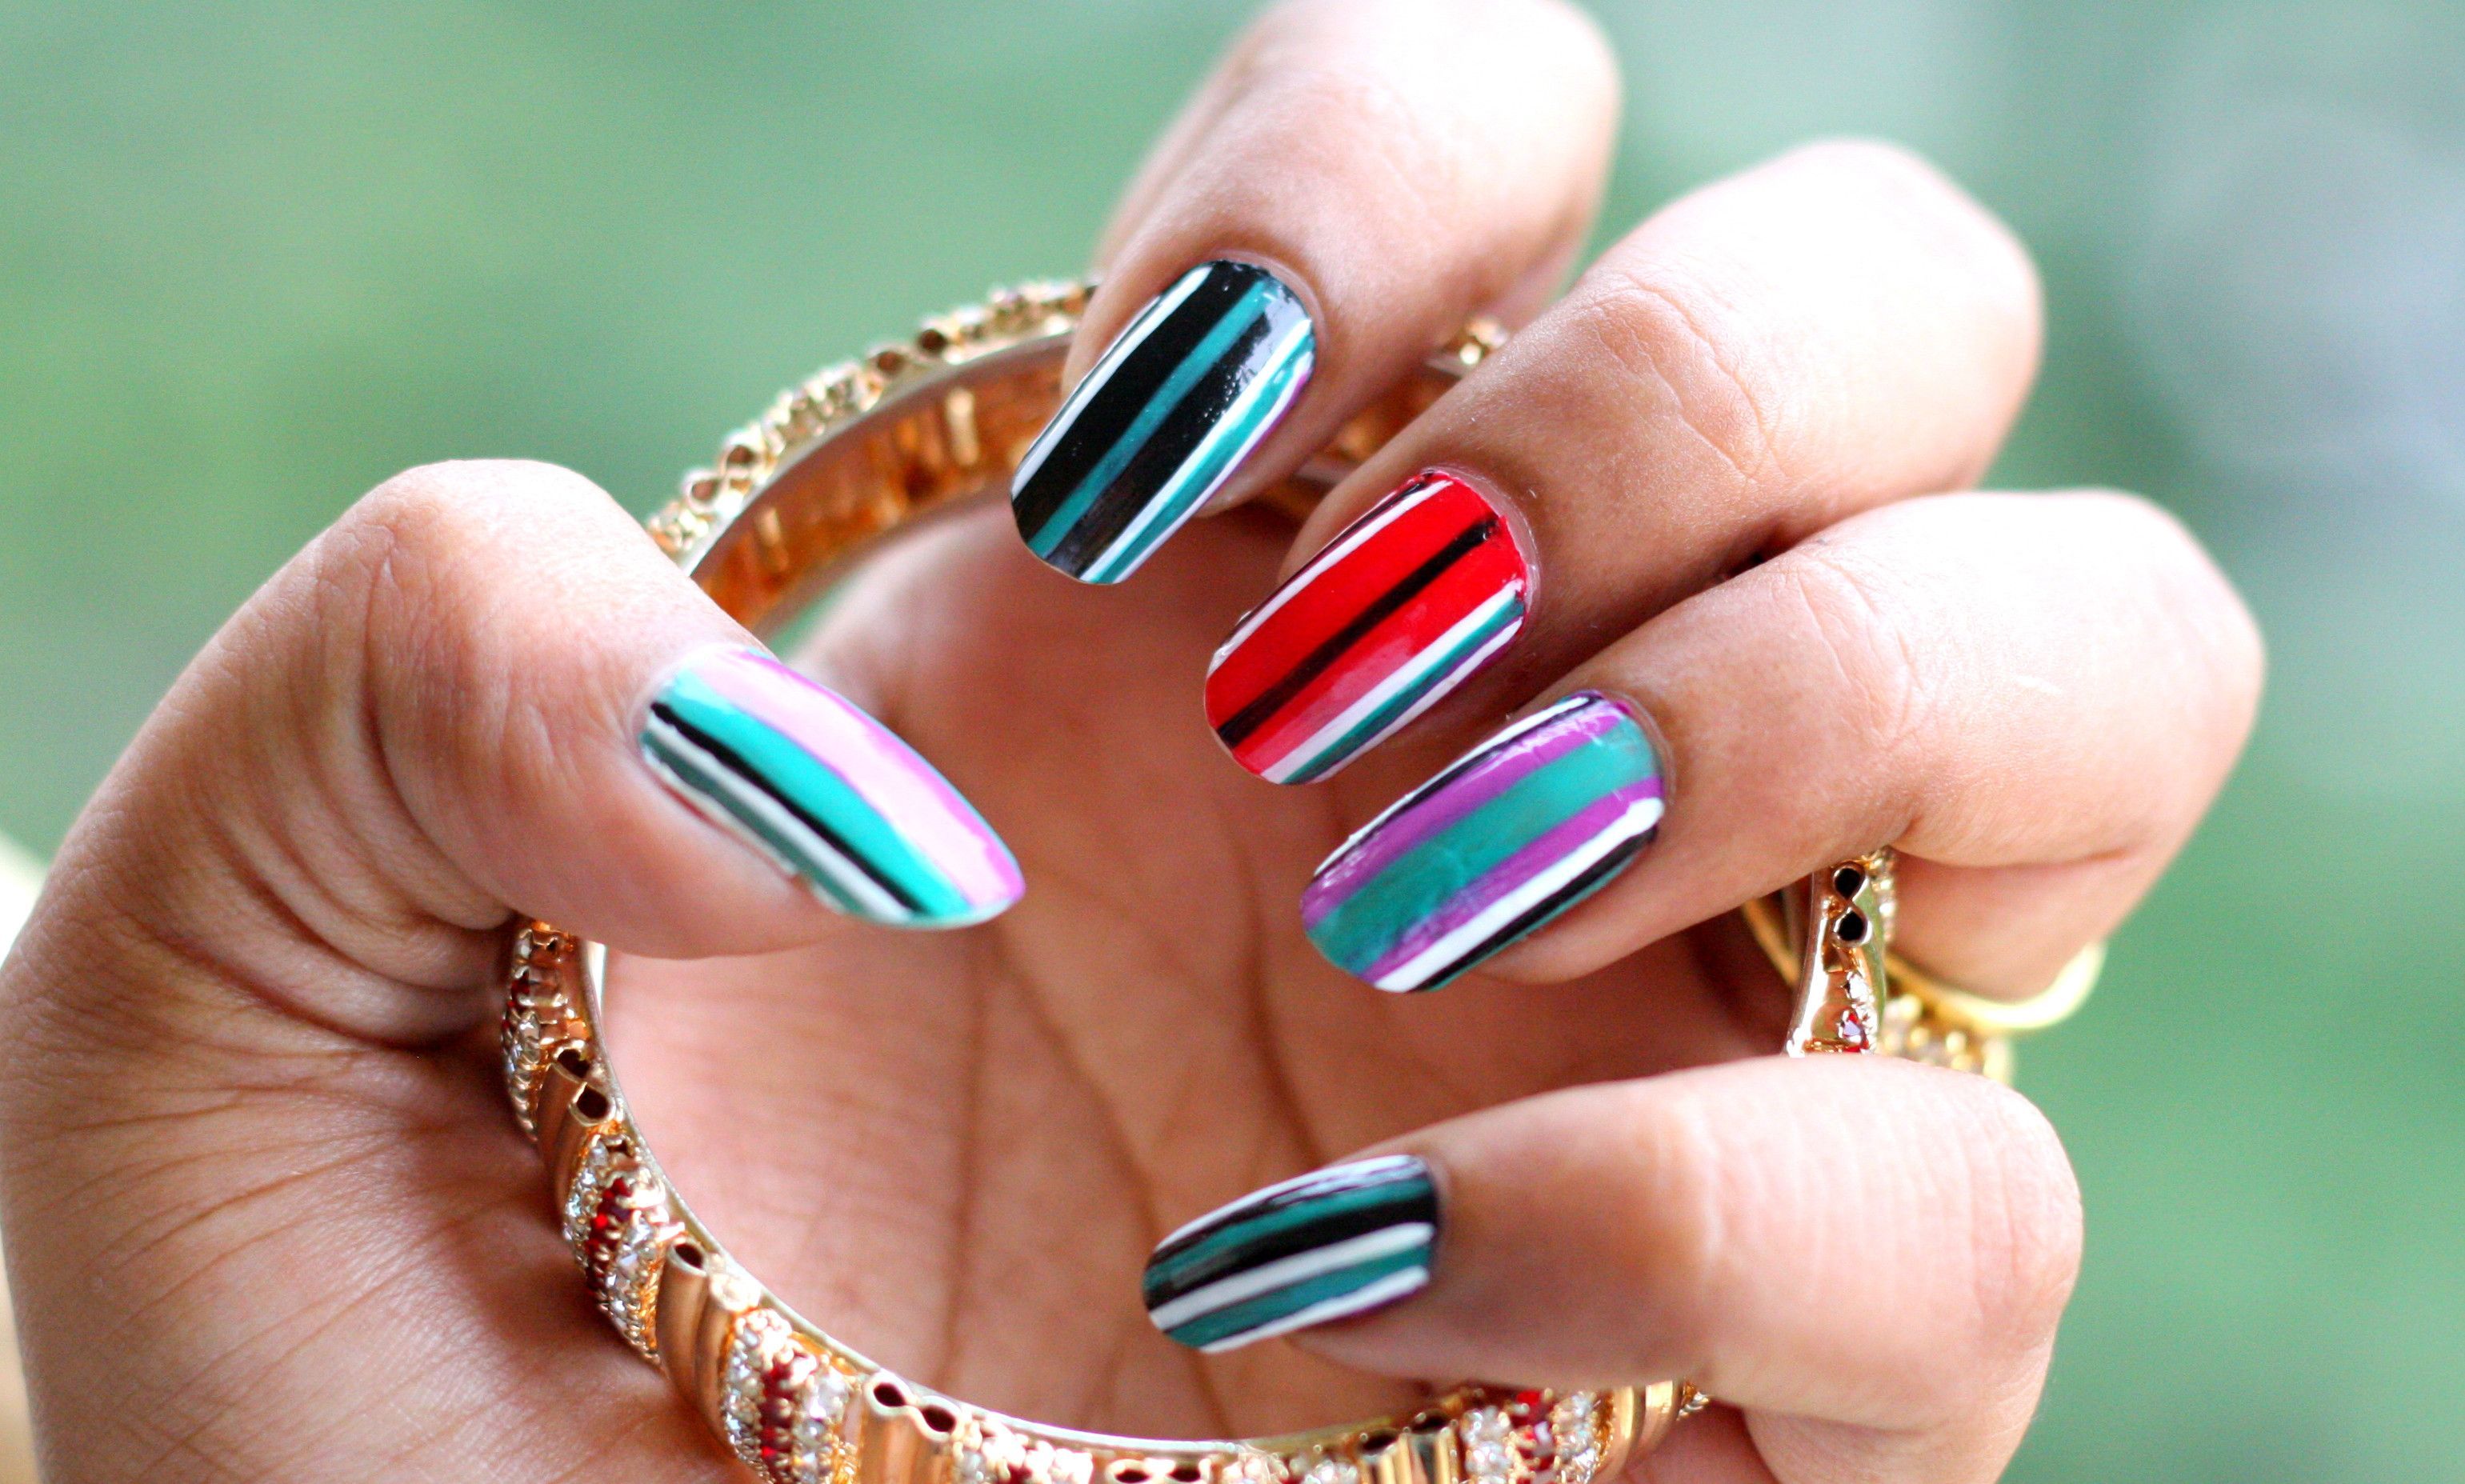 A woman's hand with colorful nail polish holding a gold bracelet. - Nails